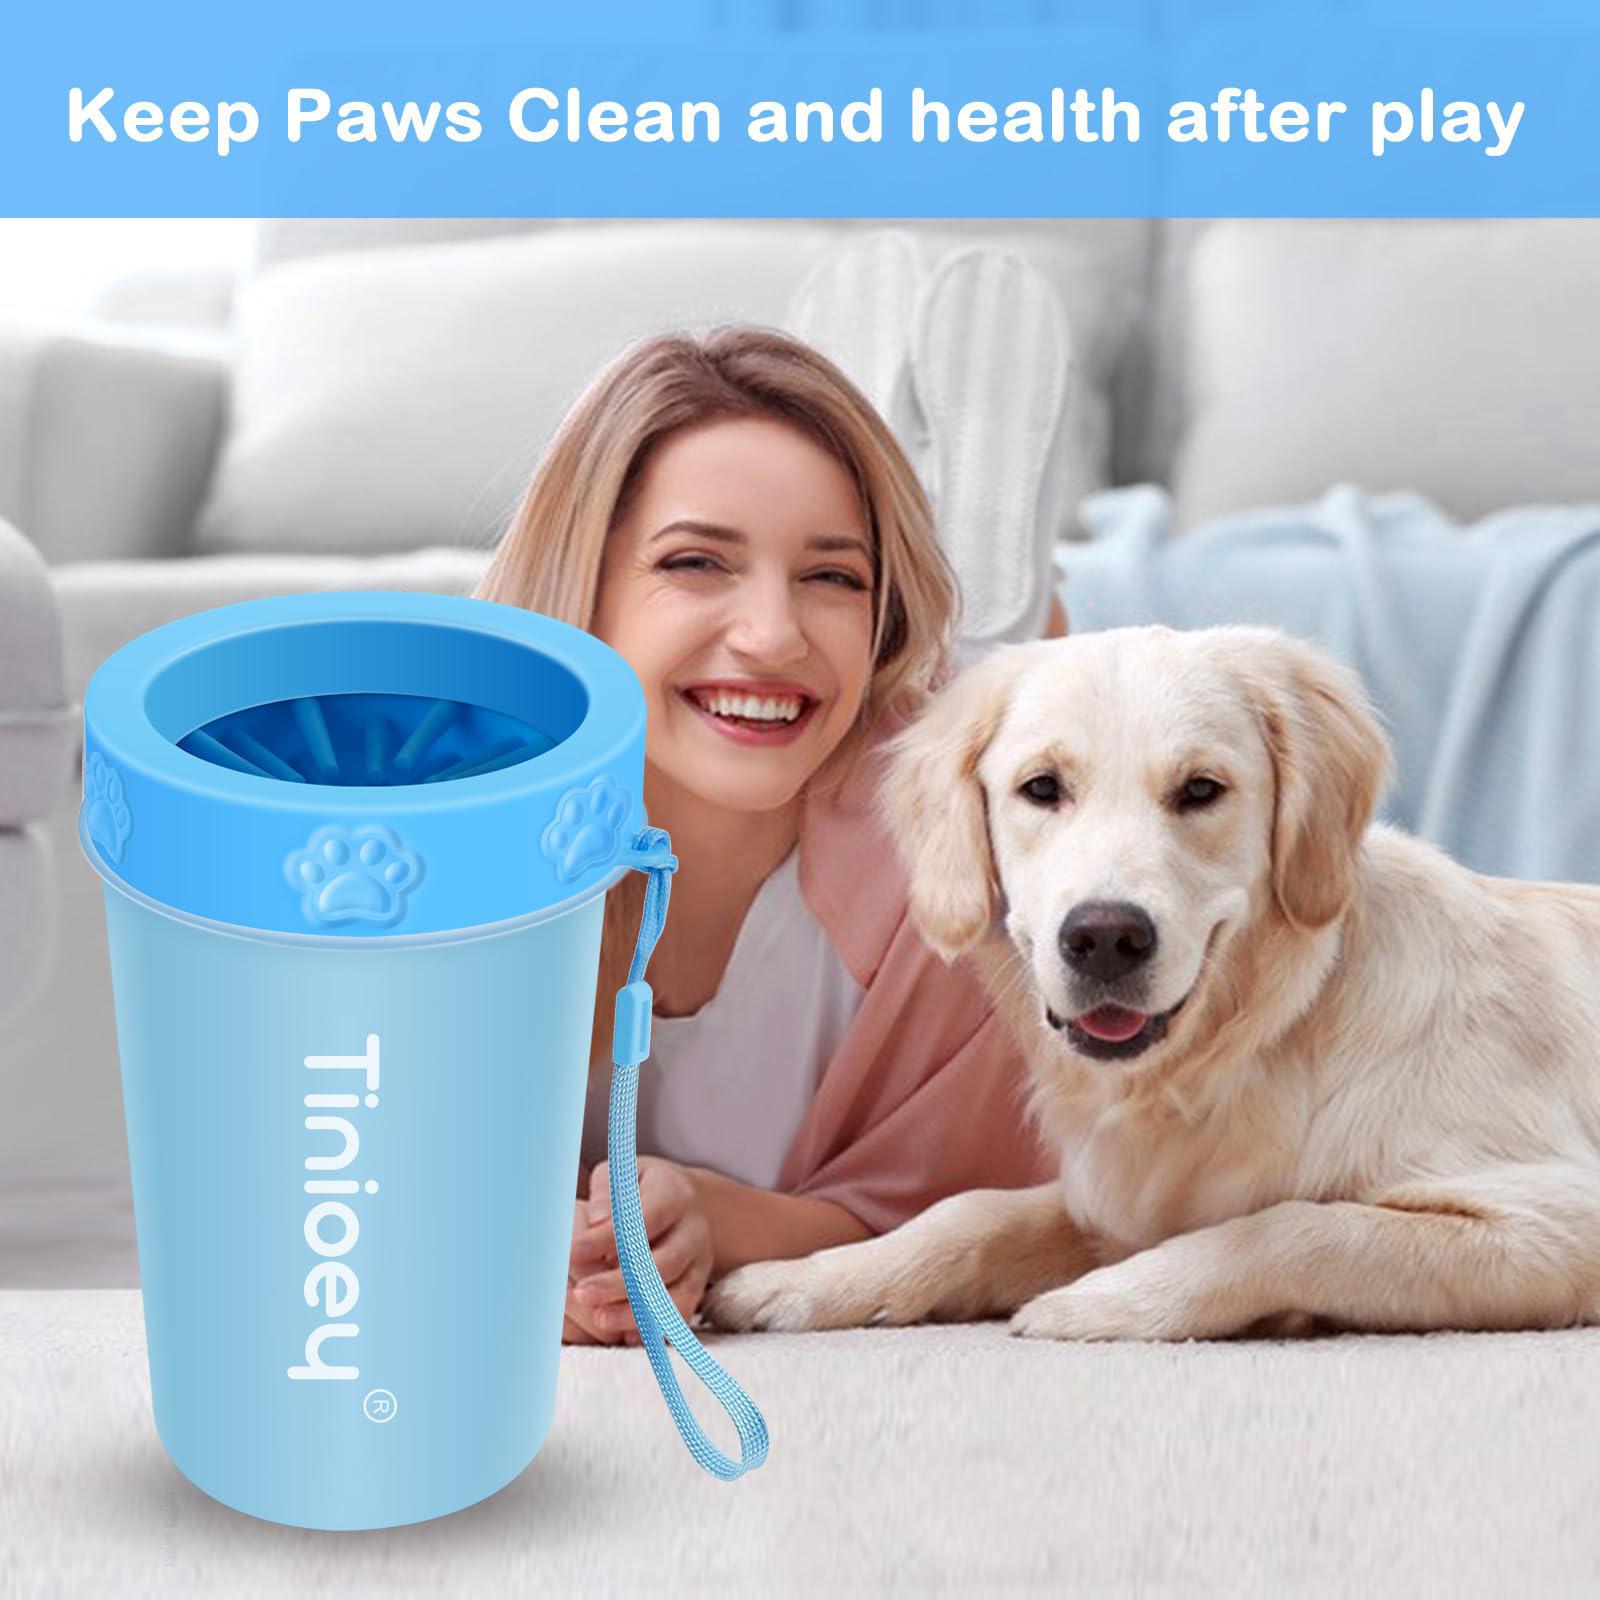 Tinioey dog paw cleaner for medium dogs (with 3 absorbent towels), dog paw washer, paw buddy muddy paw cleaner, pet foot cleaner